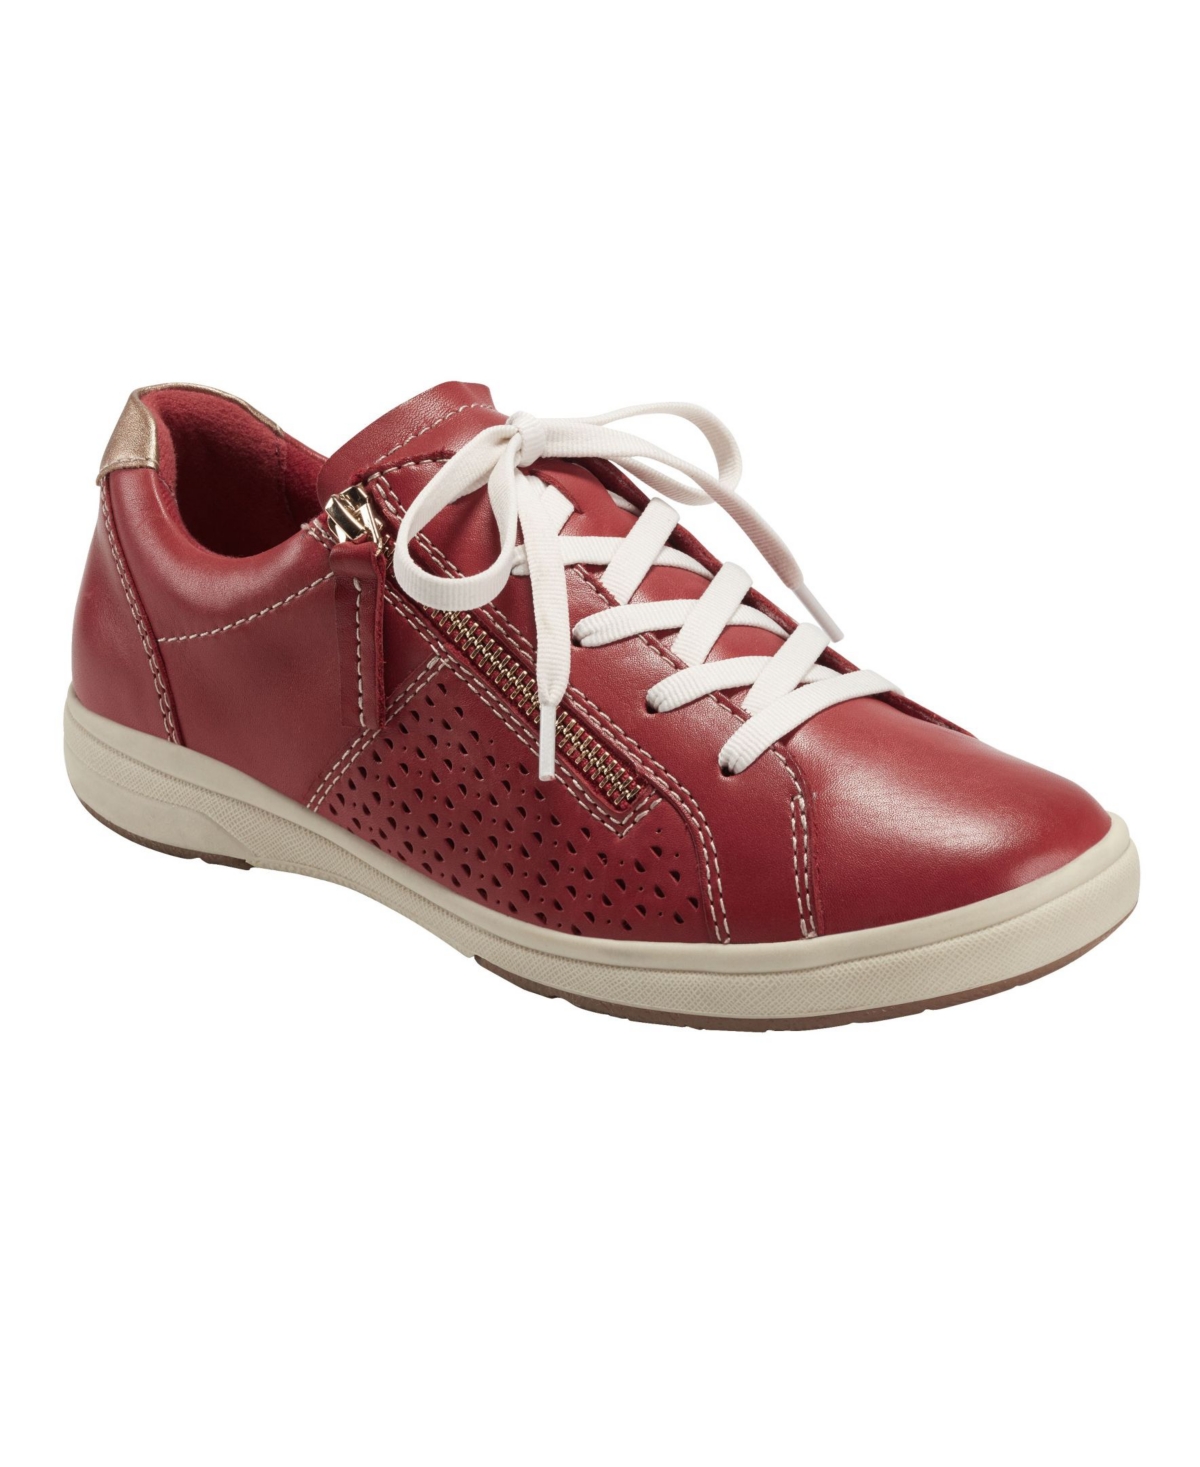 Earth Origins Women's Etta Casual Lace Up Sneakers Women's Shoes In Bright Red- Leather